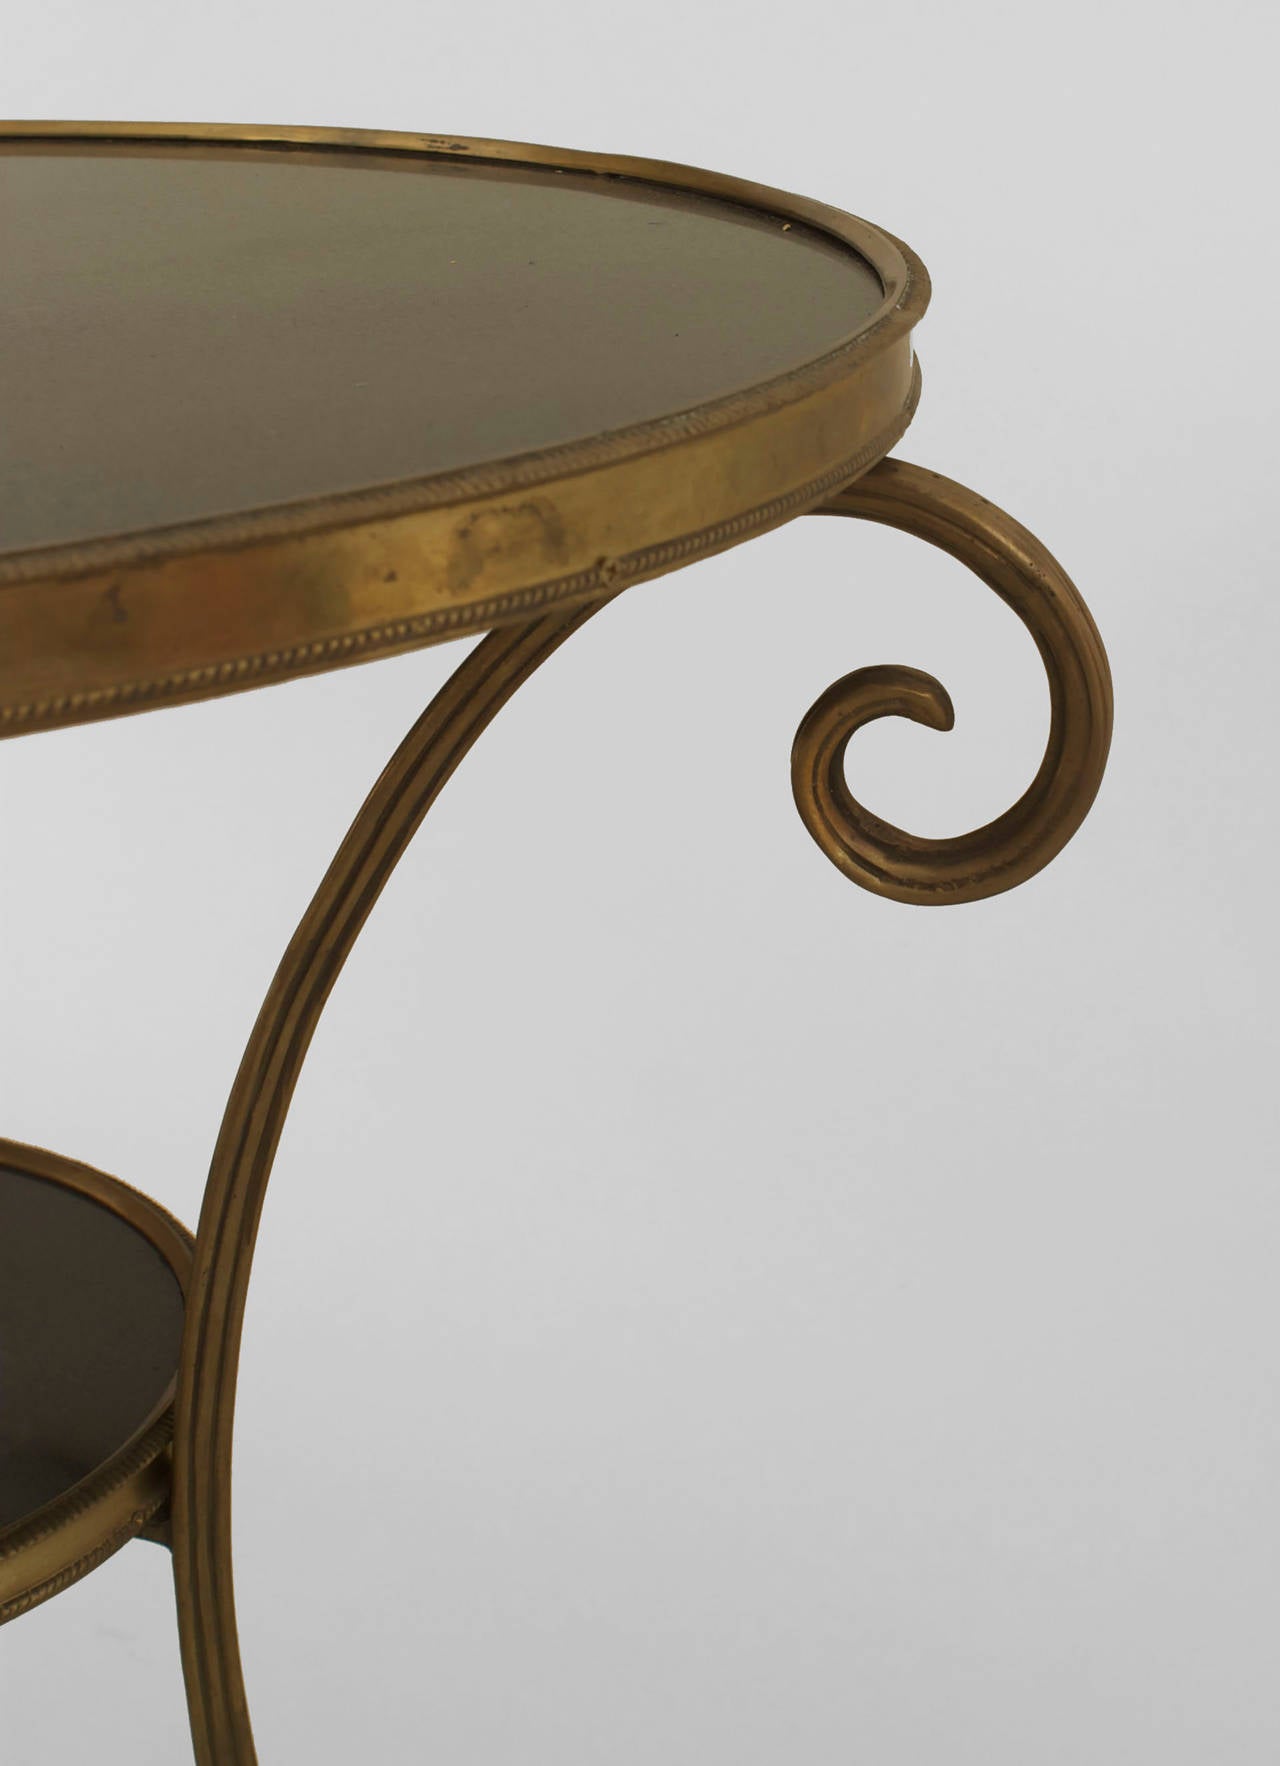 French Charles X-style (19/20th Century) round bronze gueridon end table with 3 scroll legs supporting a black marble top and shelf with a lower stretcher having a finial.
